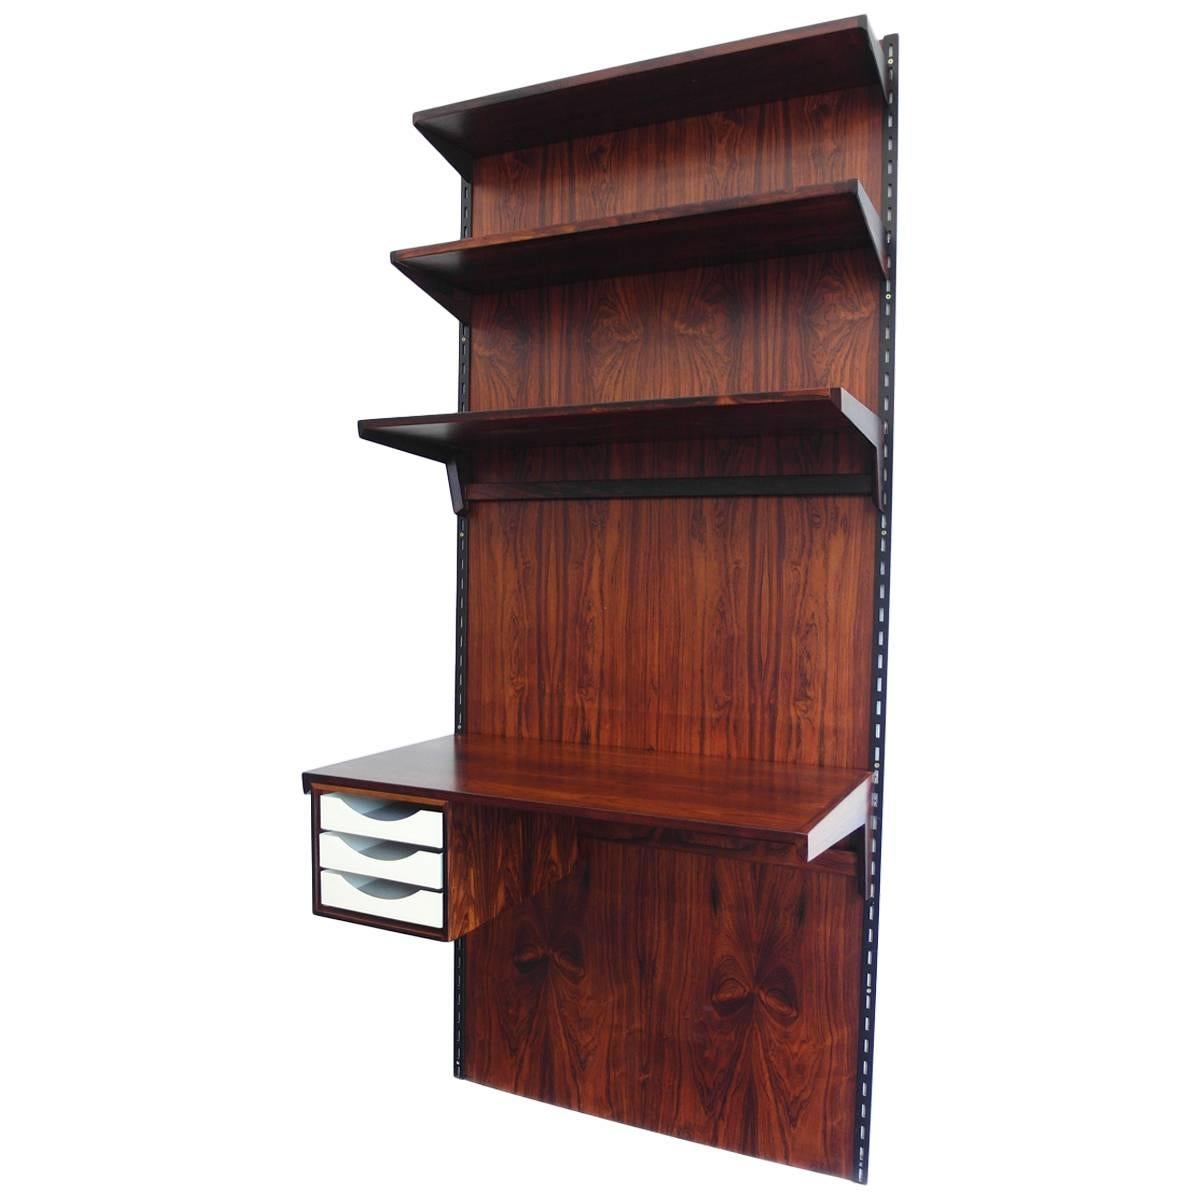 Rosewood wall-mounted shelving unit with desk by Kai Kristiansen for FM Møbler